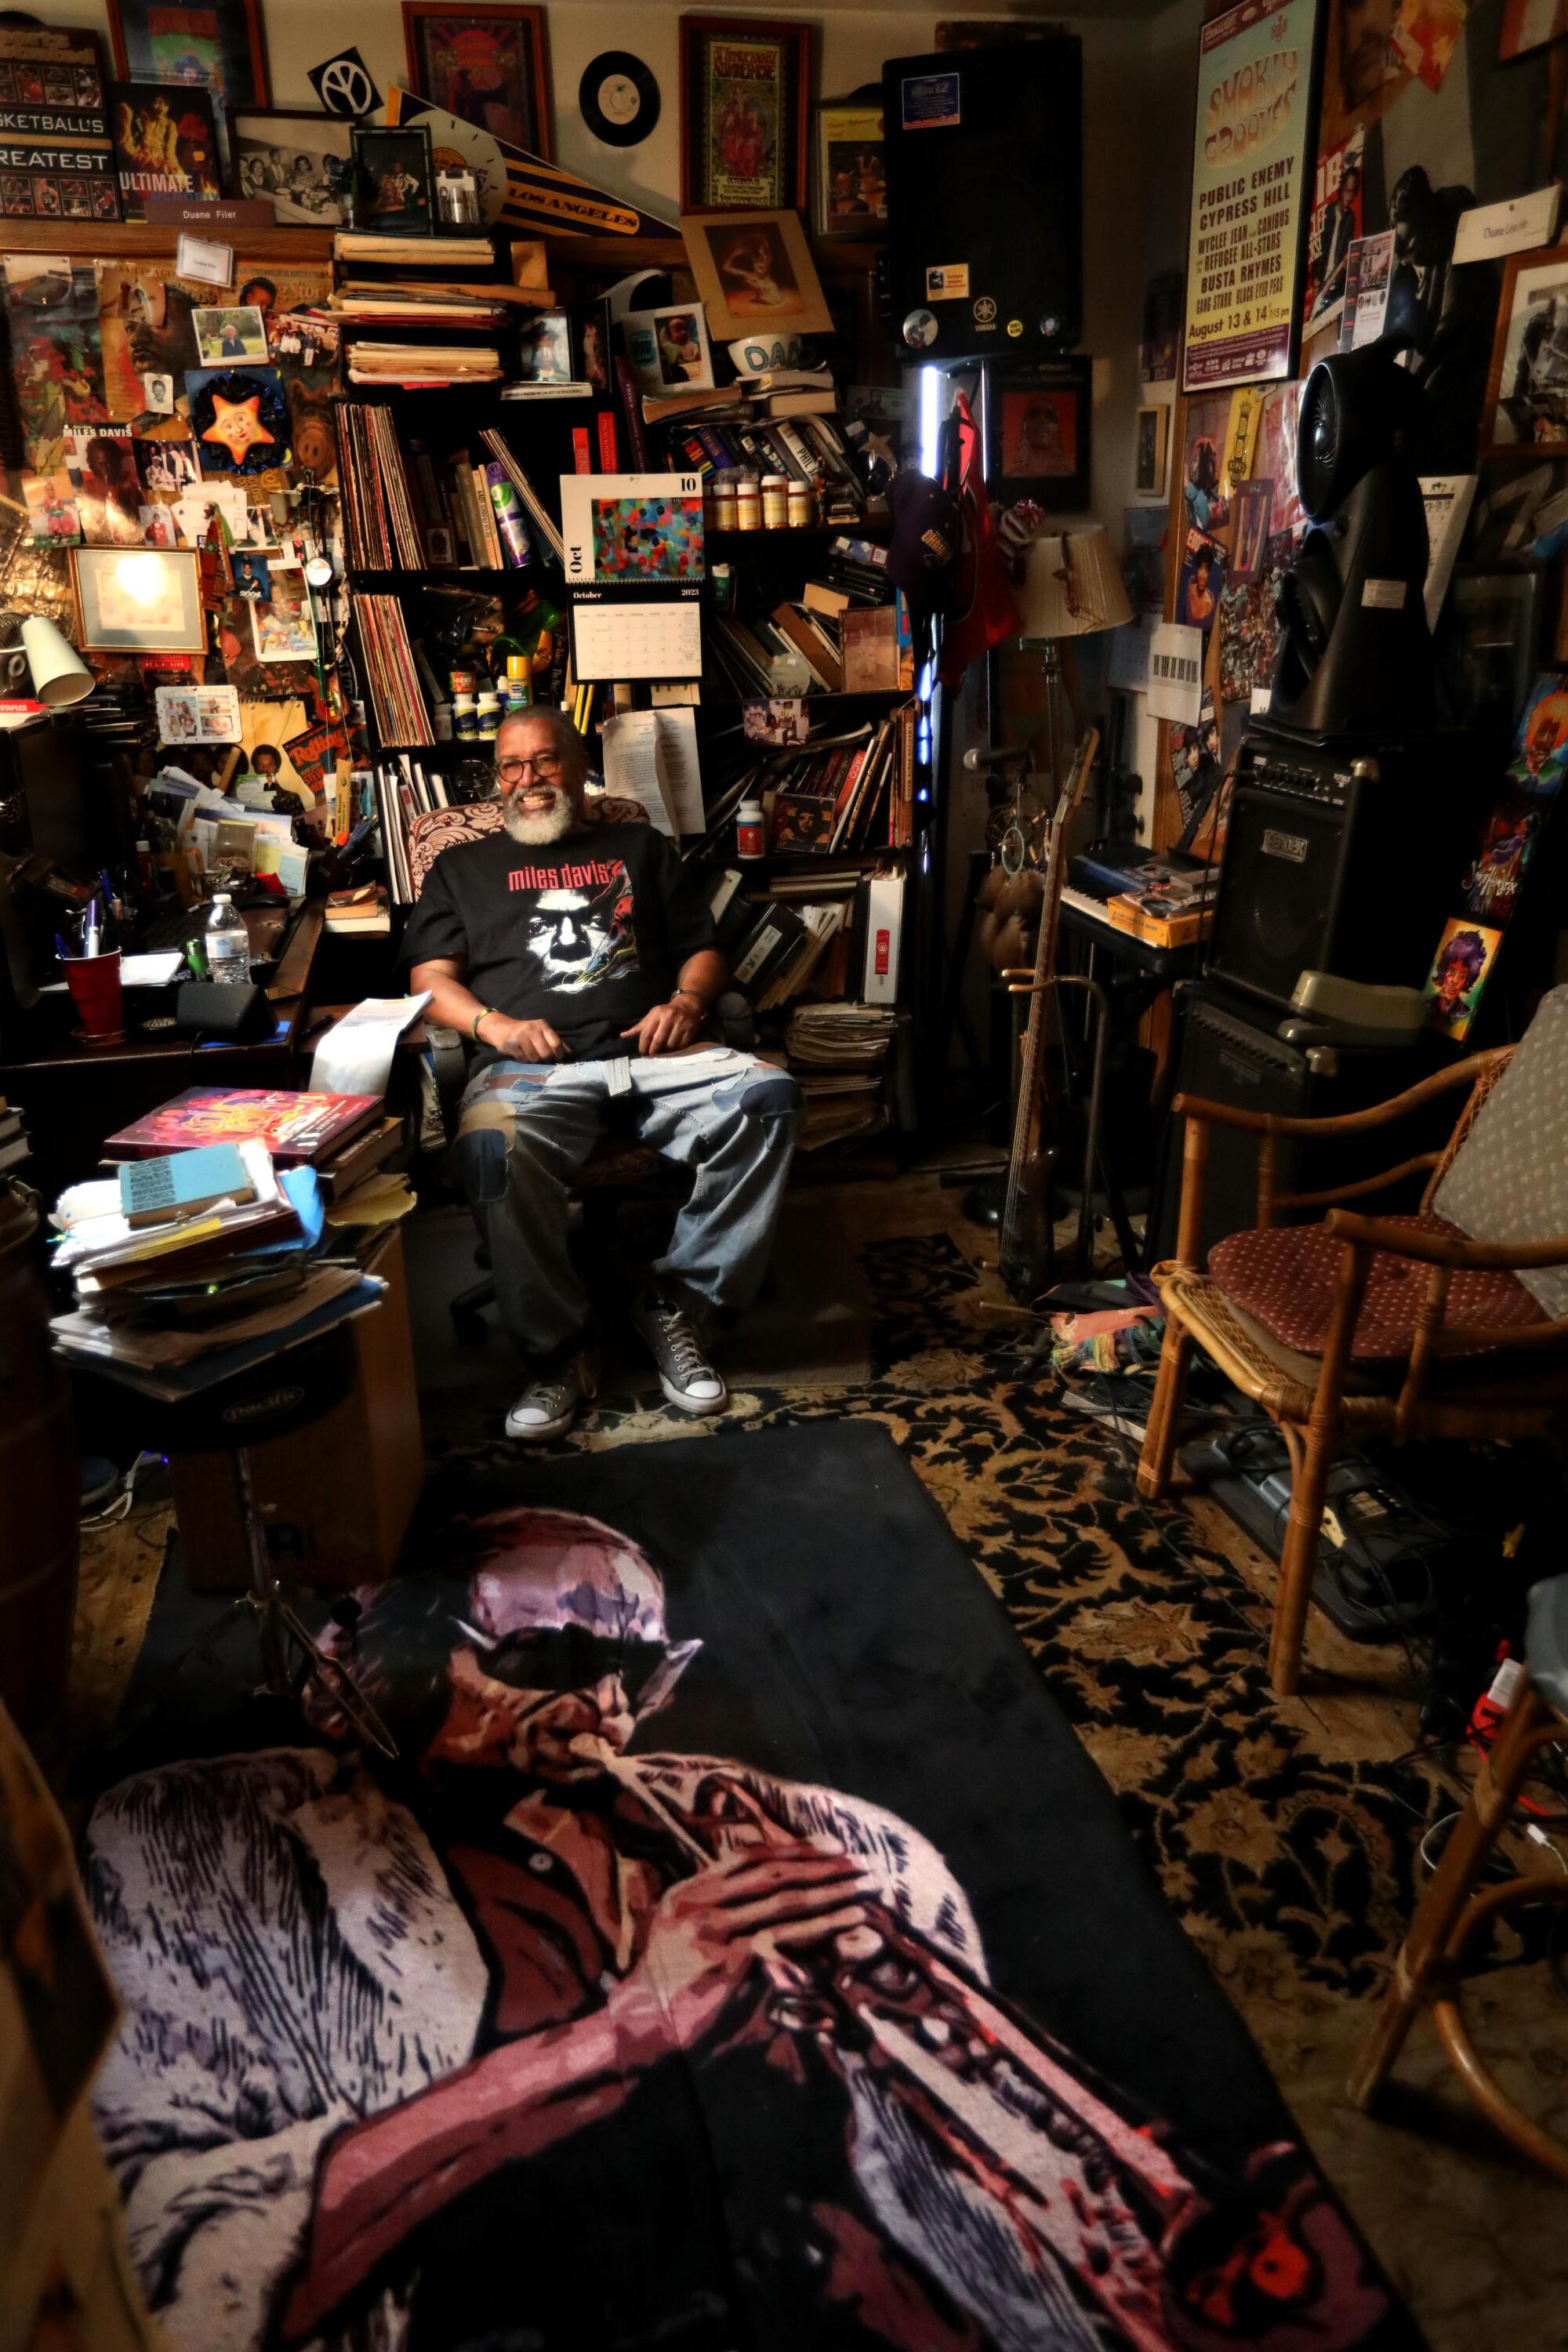 A man sits in his home office surrounded by images of musicians